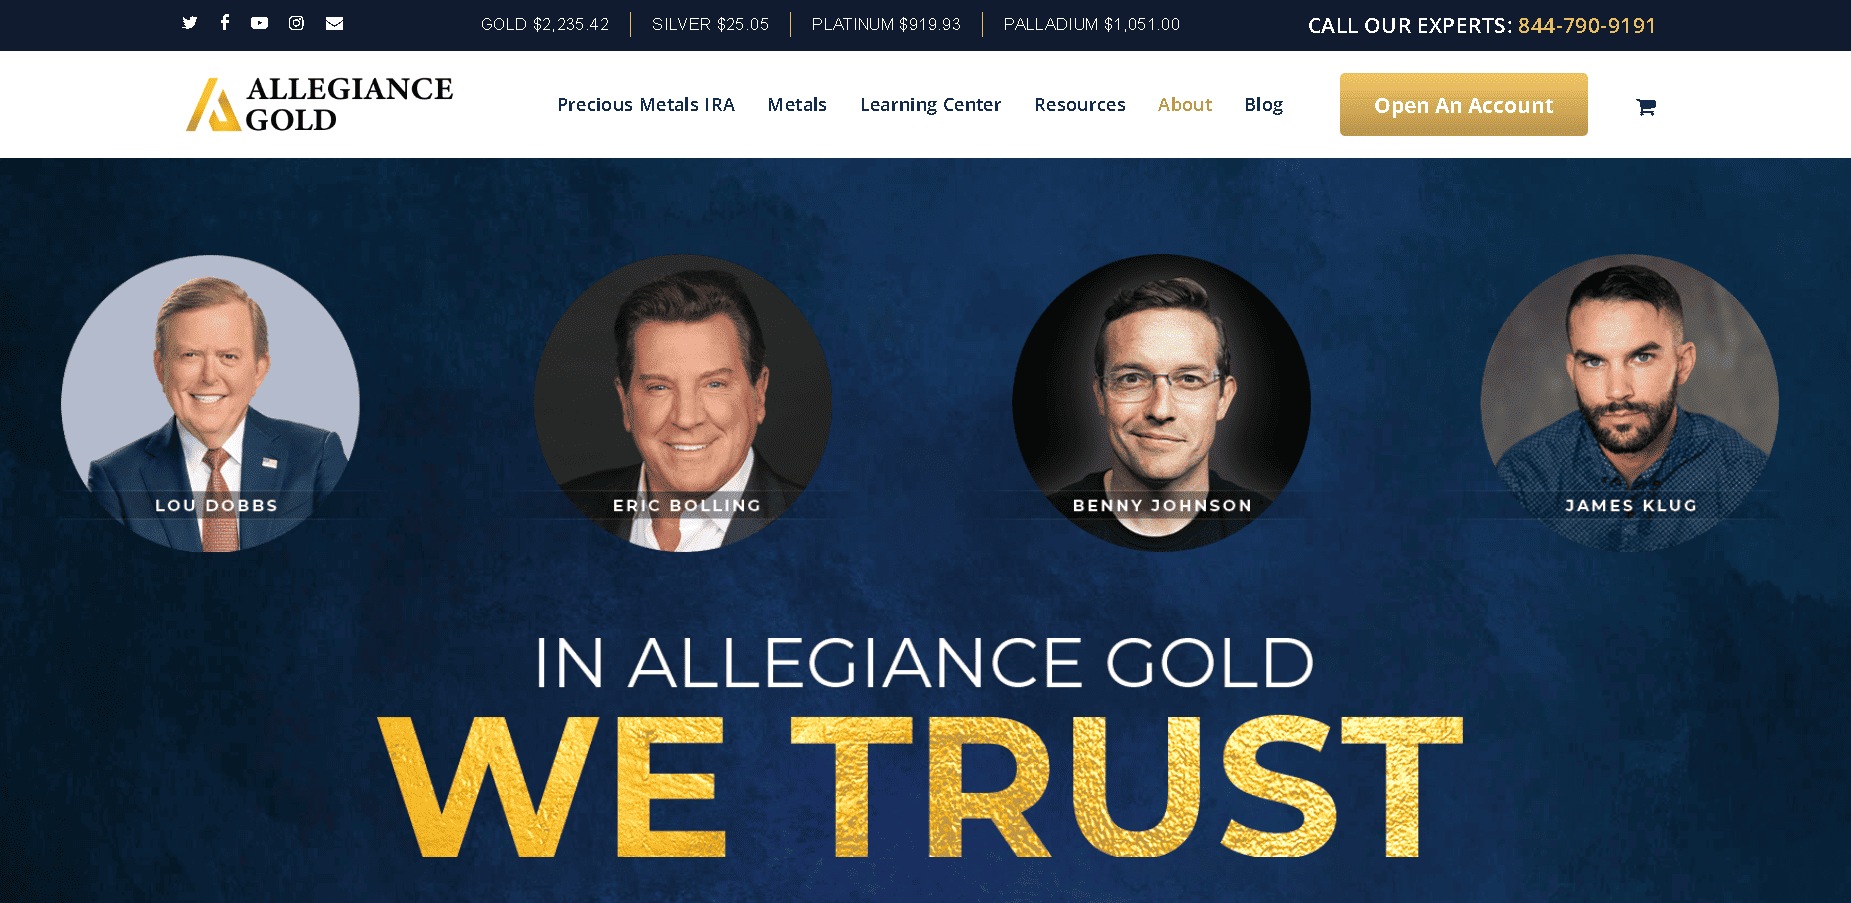 Allegiance Gold endorsers and ambassadors